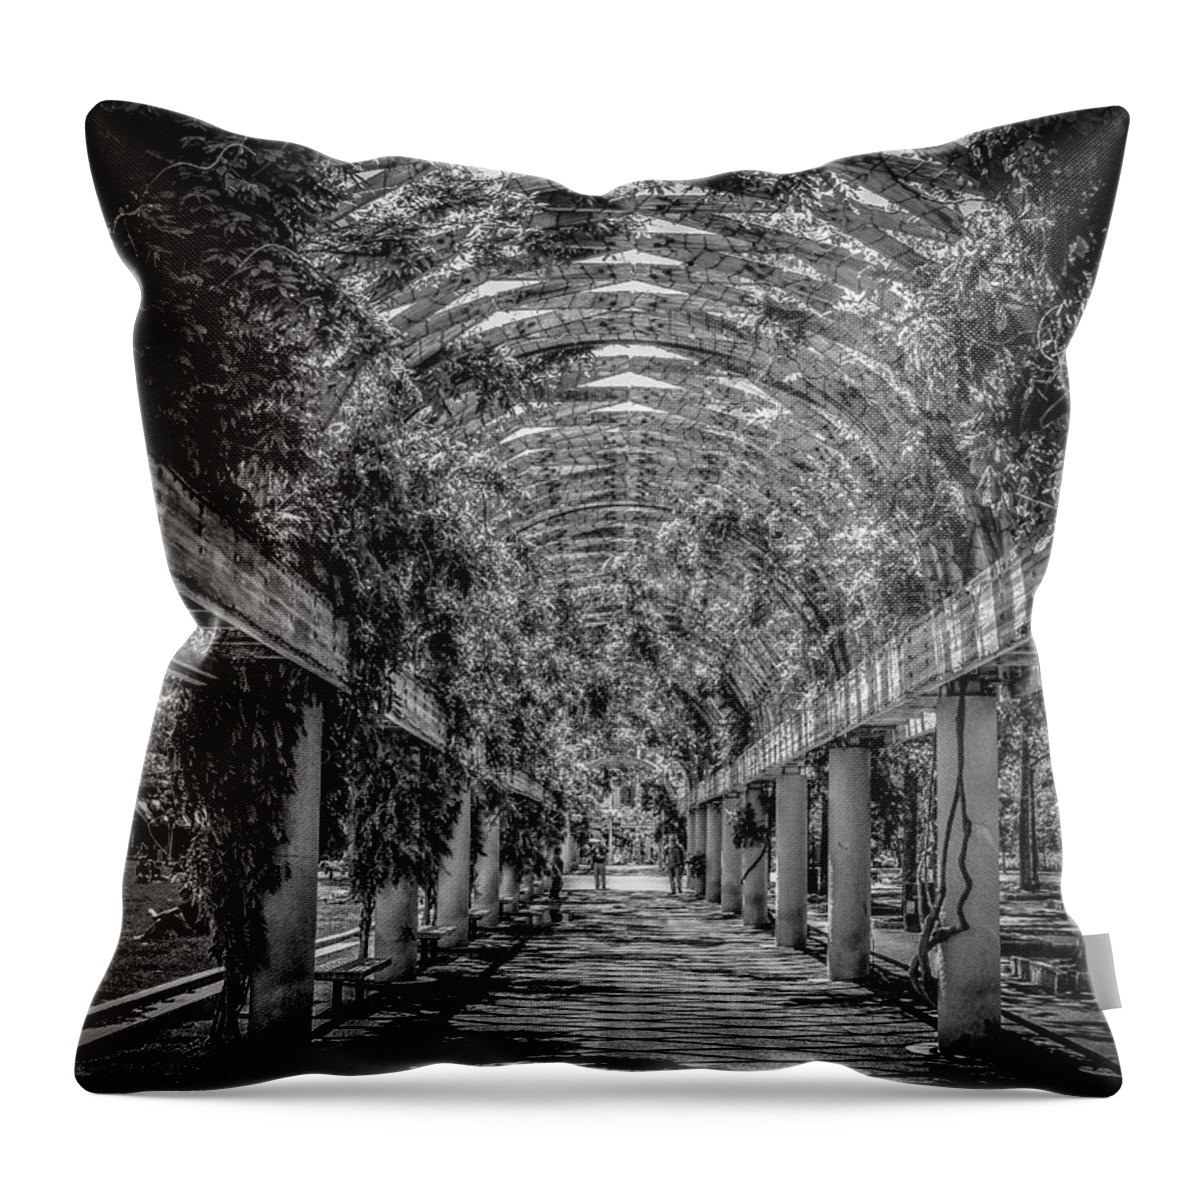 Arbor Throw Pillow featuring the photograph Archway Arbor by TK Goforth